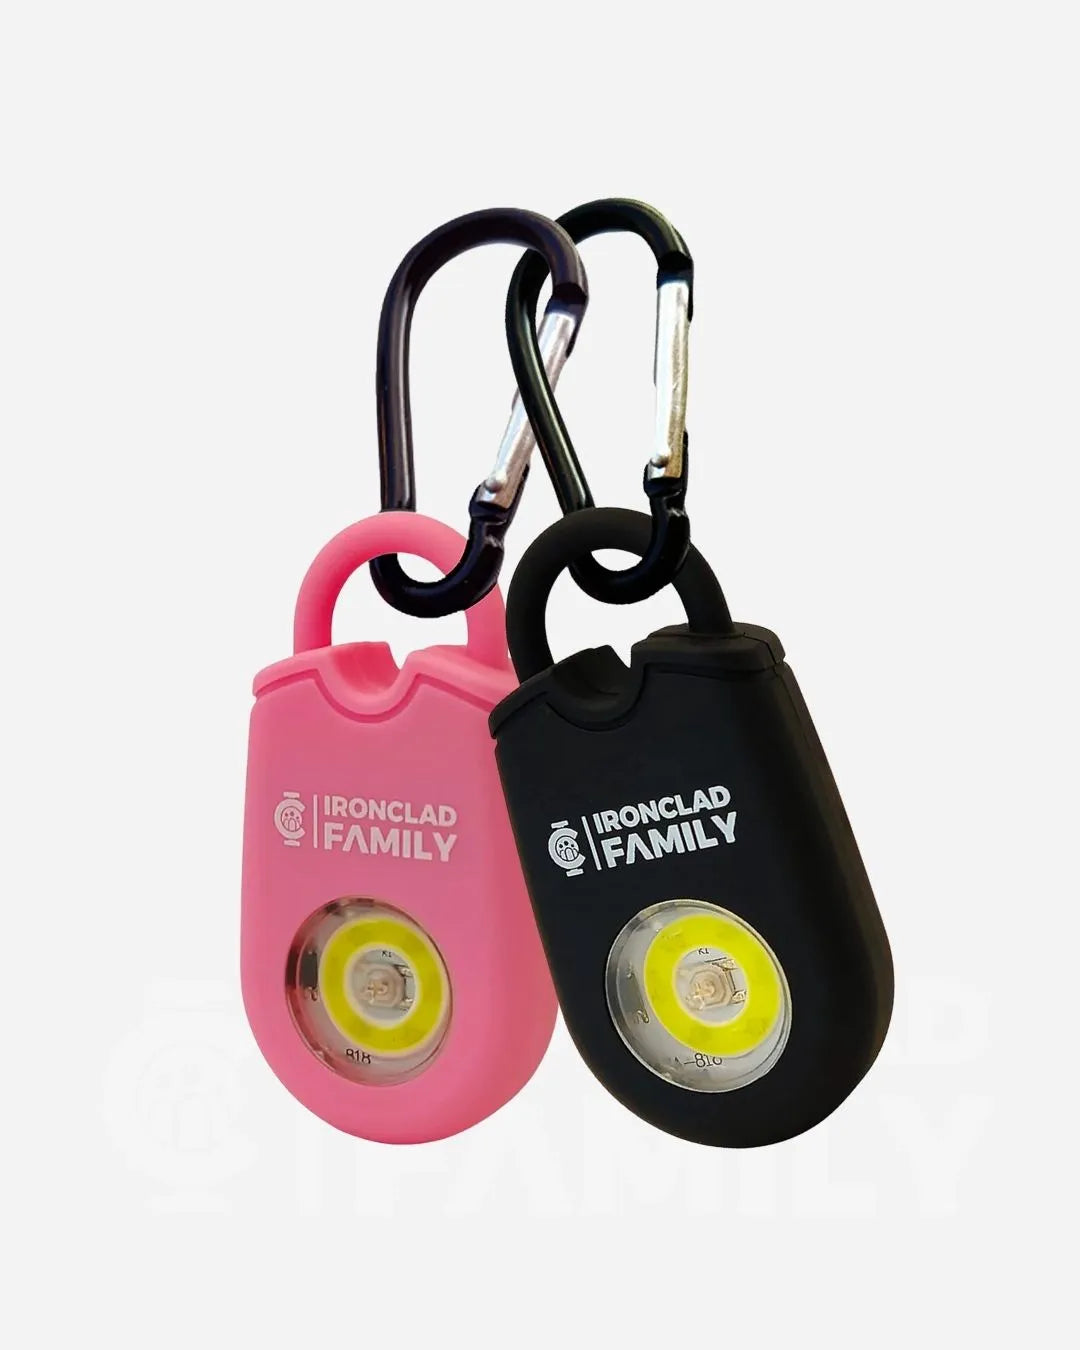 Pair of pink and black Personal Alarm Sound Pendant Keychains with carabiner